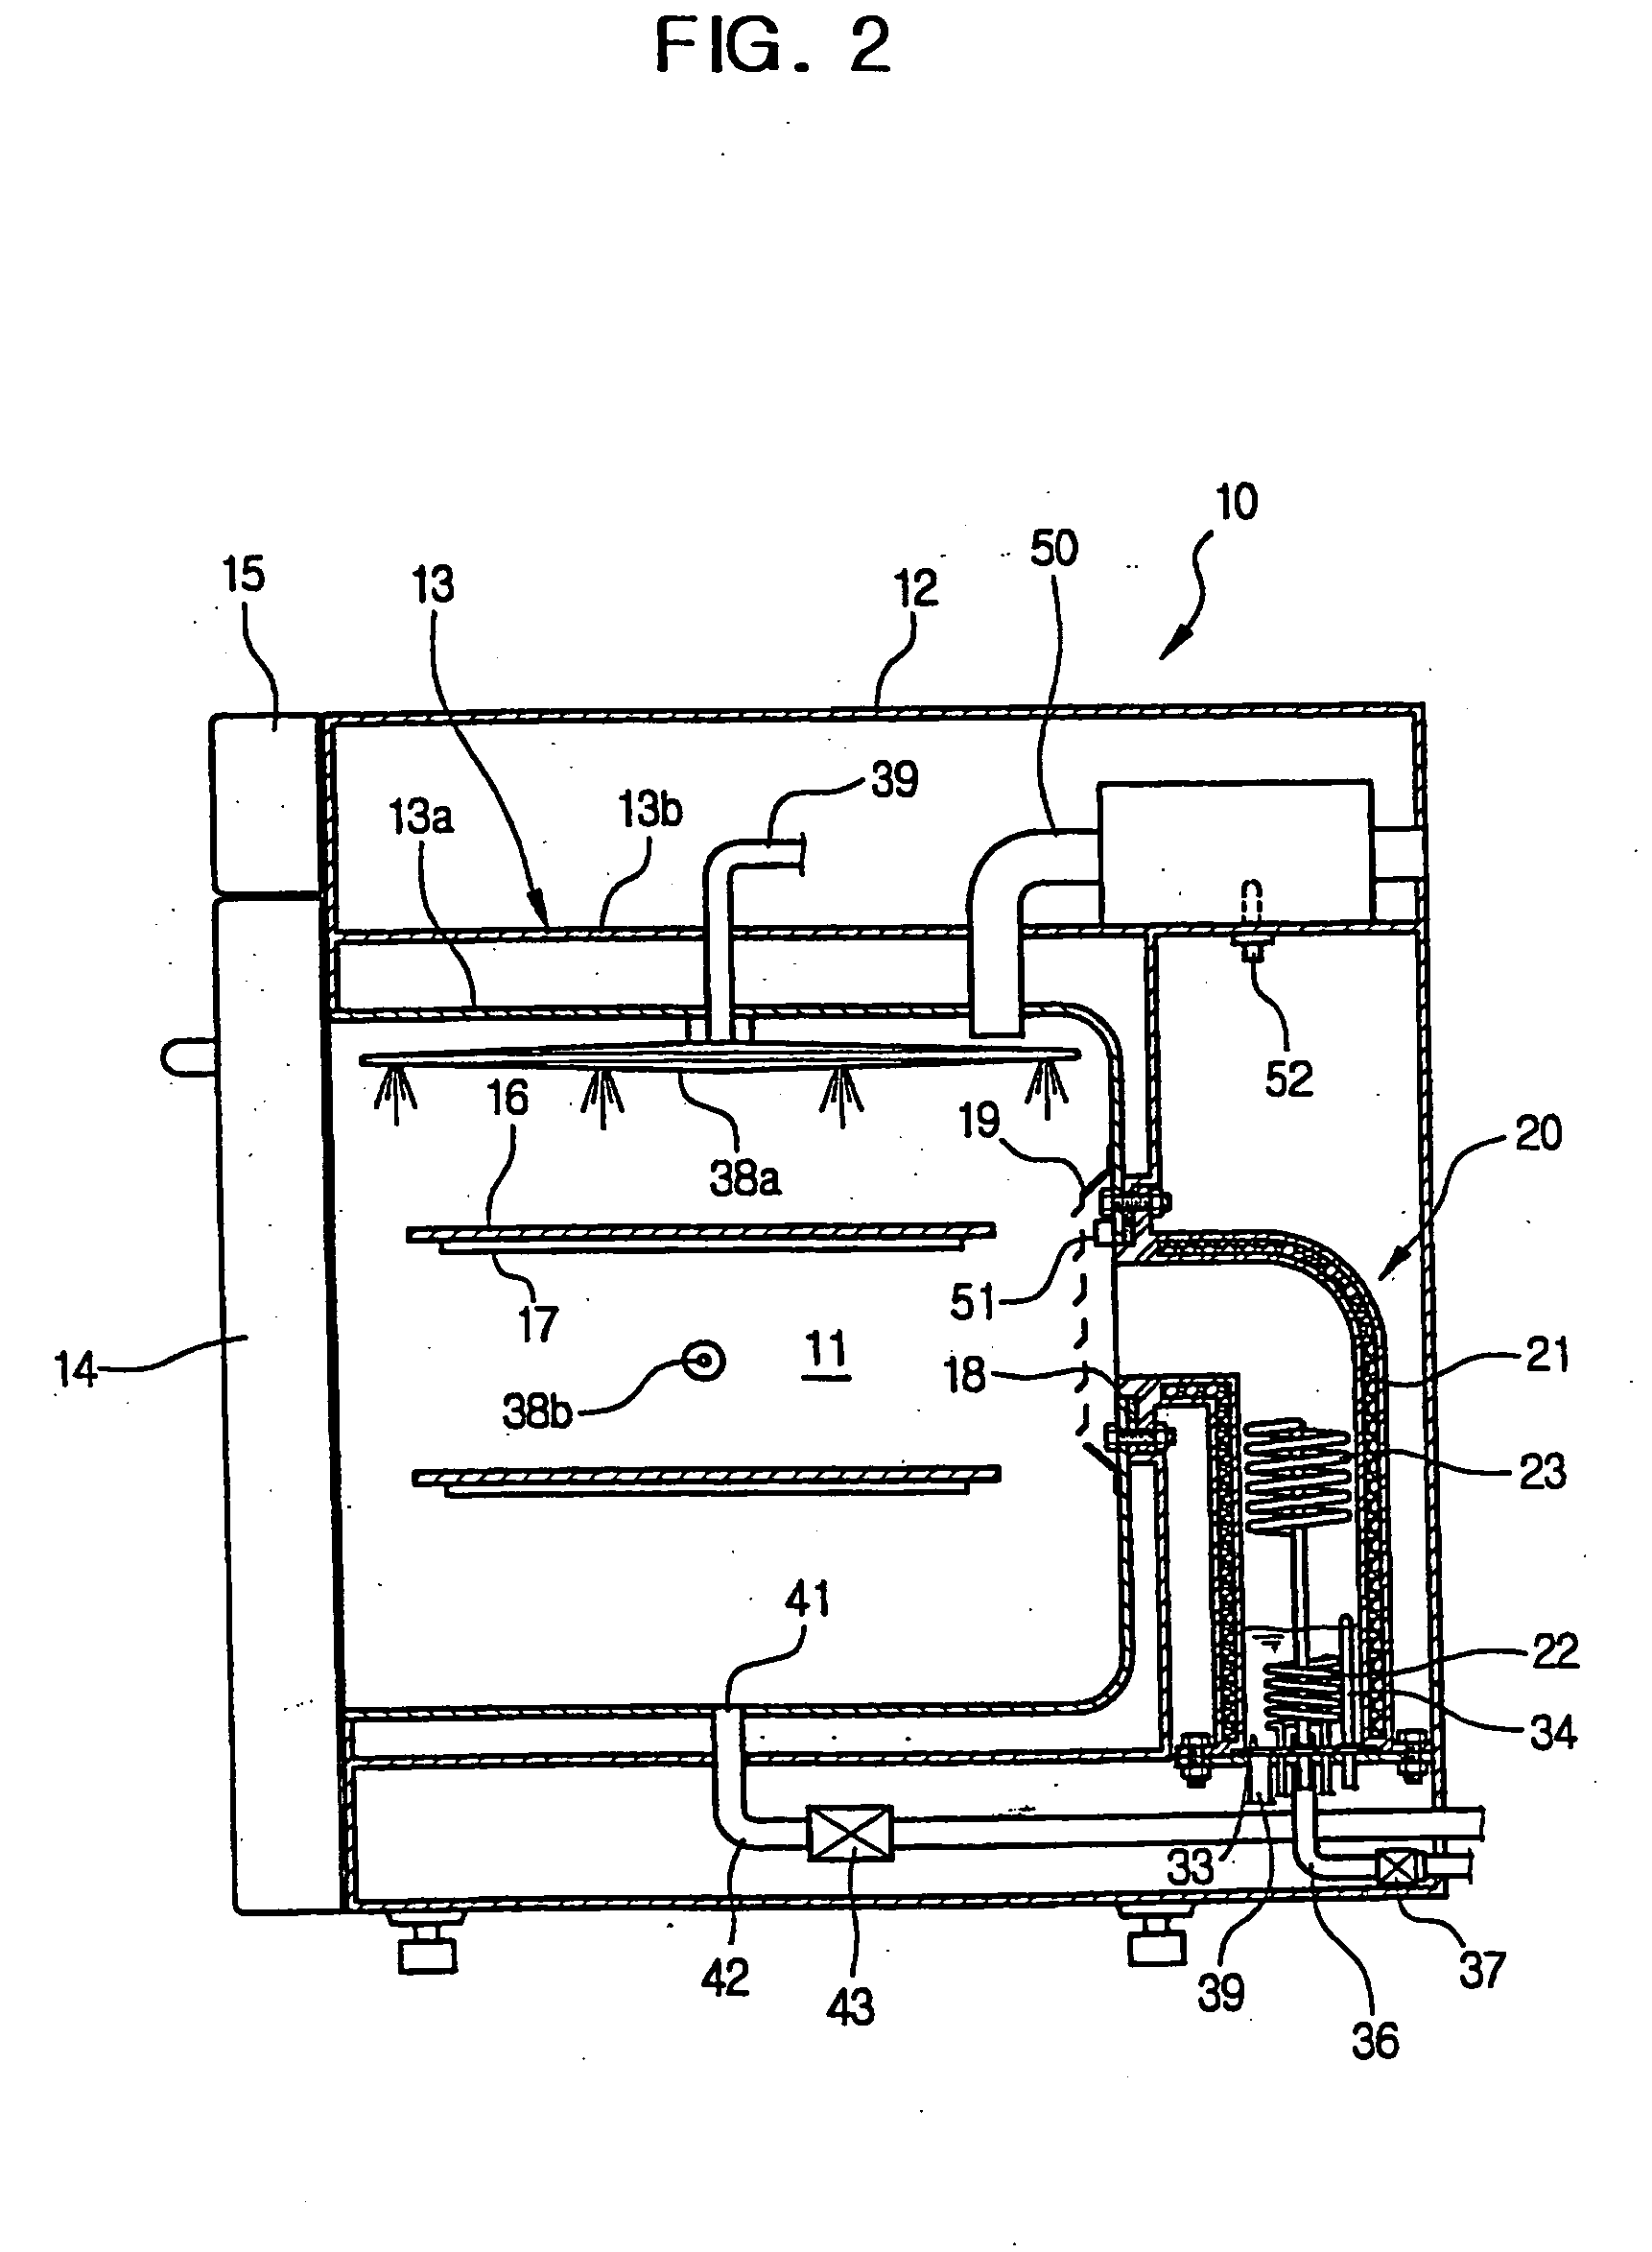 Overheated steam oven and method of controlling the same